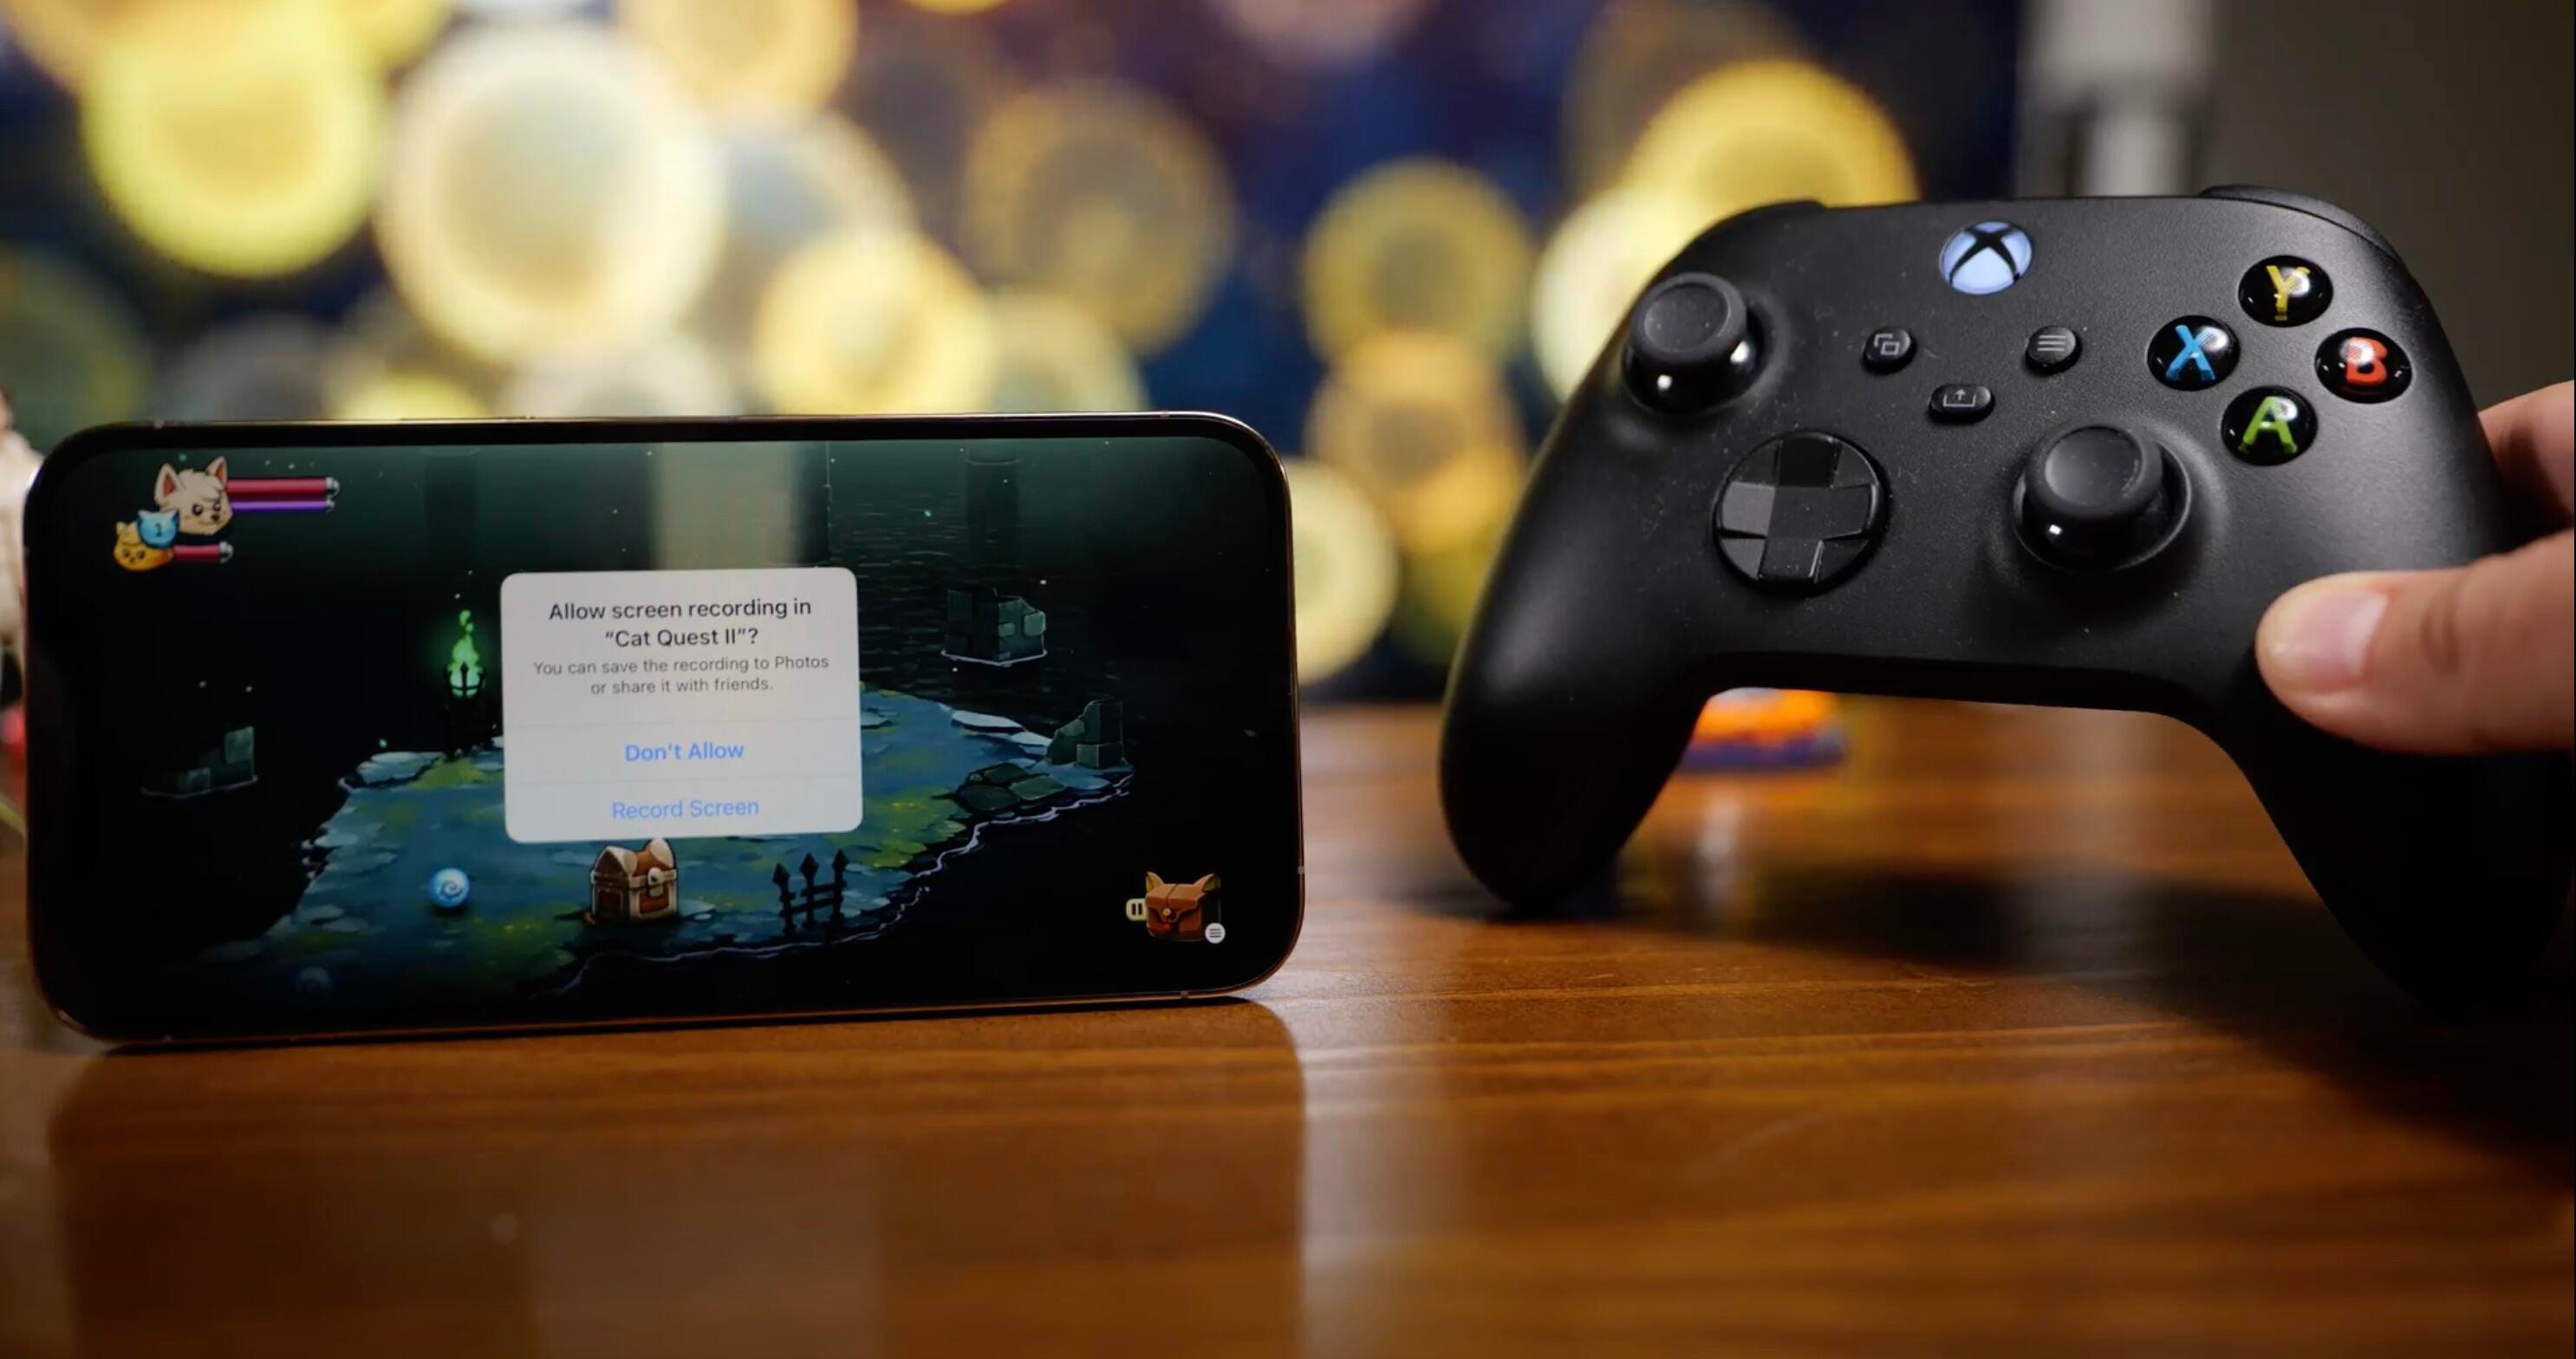 Here’s how to screen-record with an Xbox or PlayStation controller in iOS 15